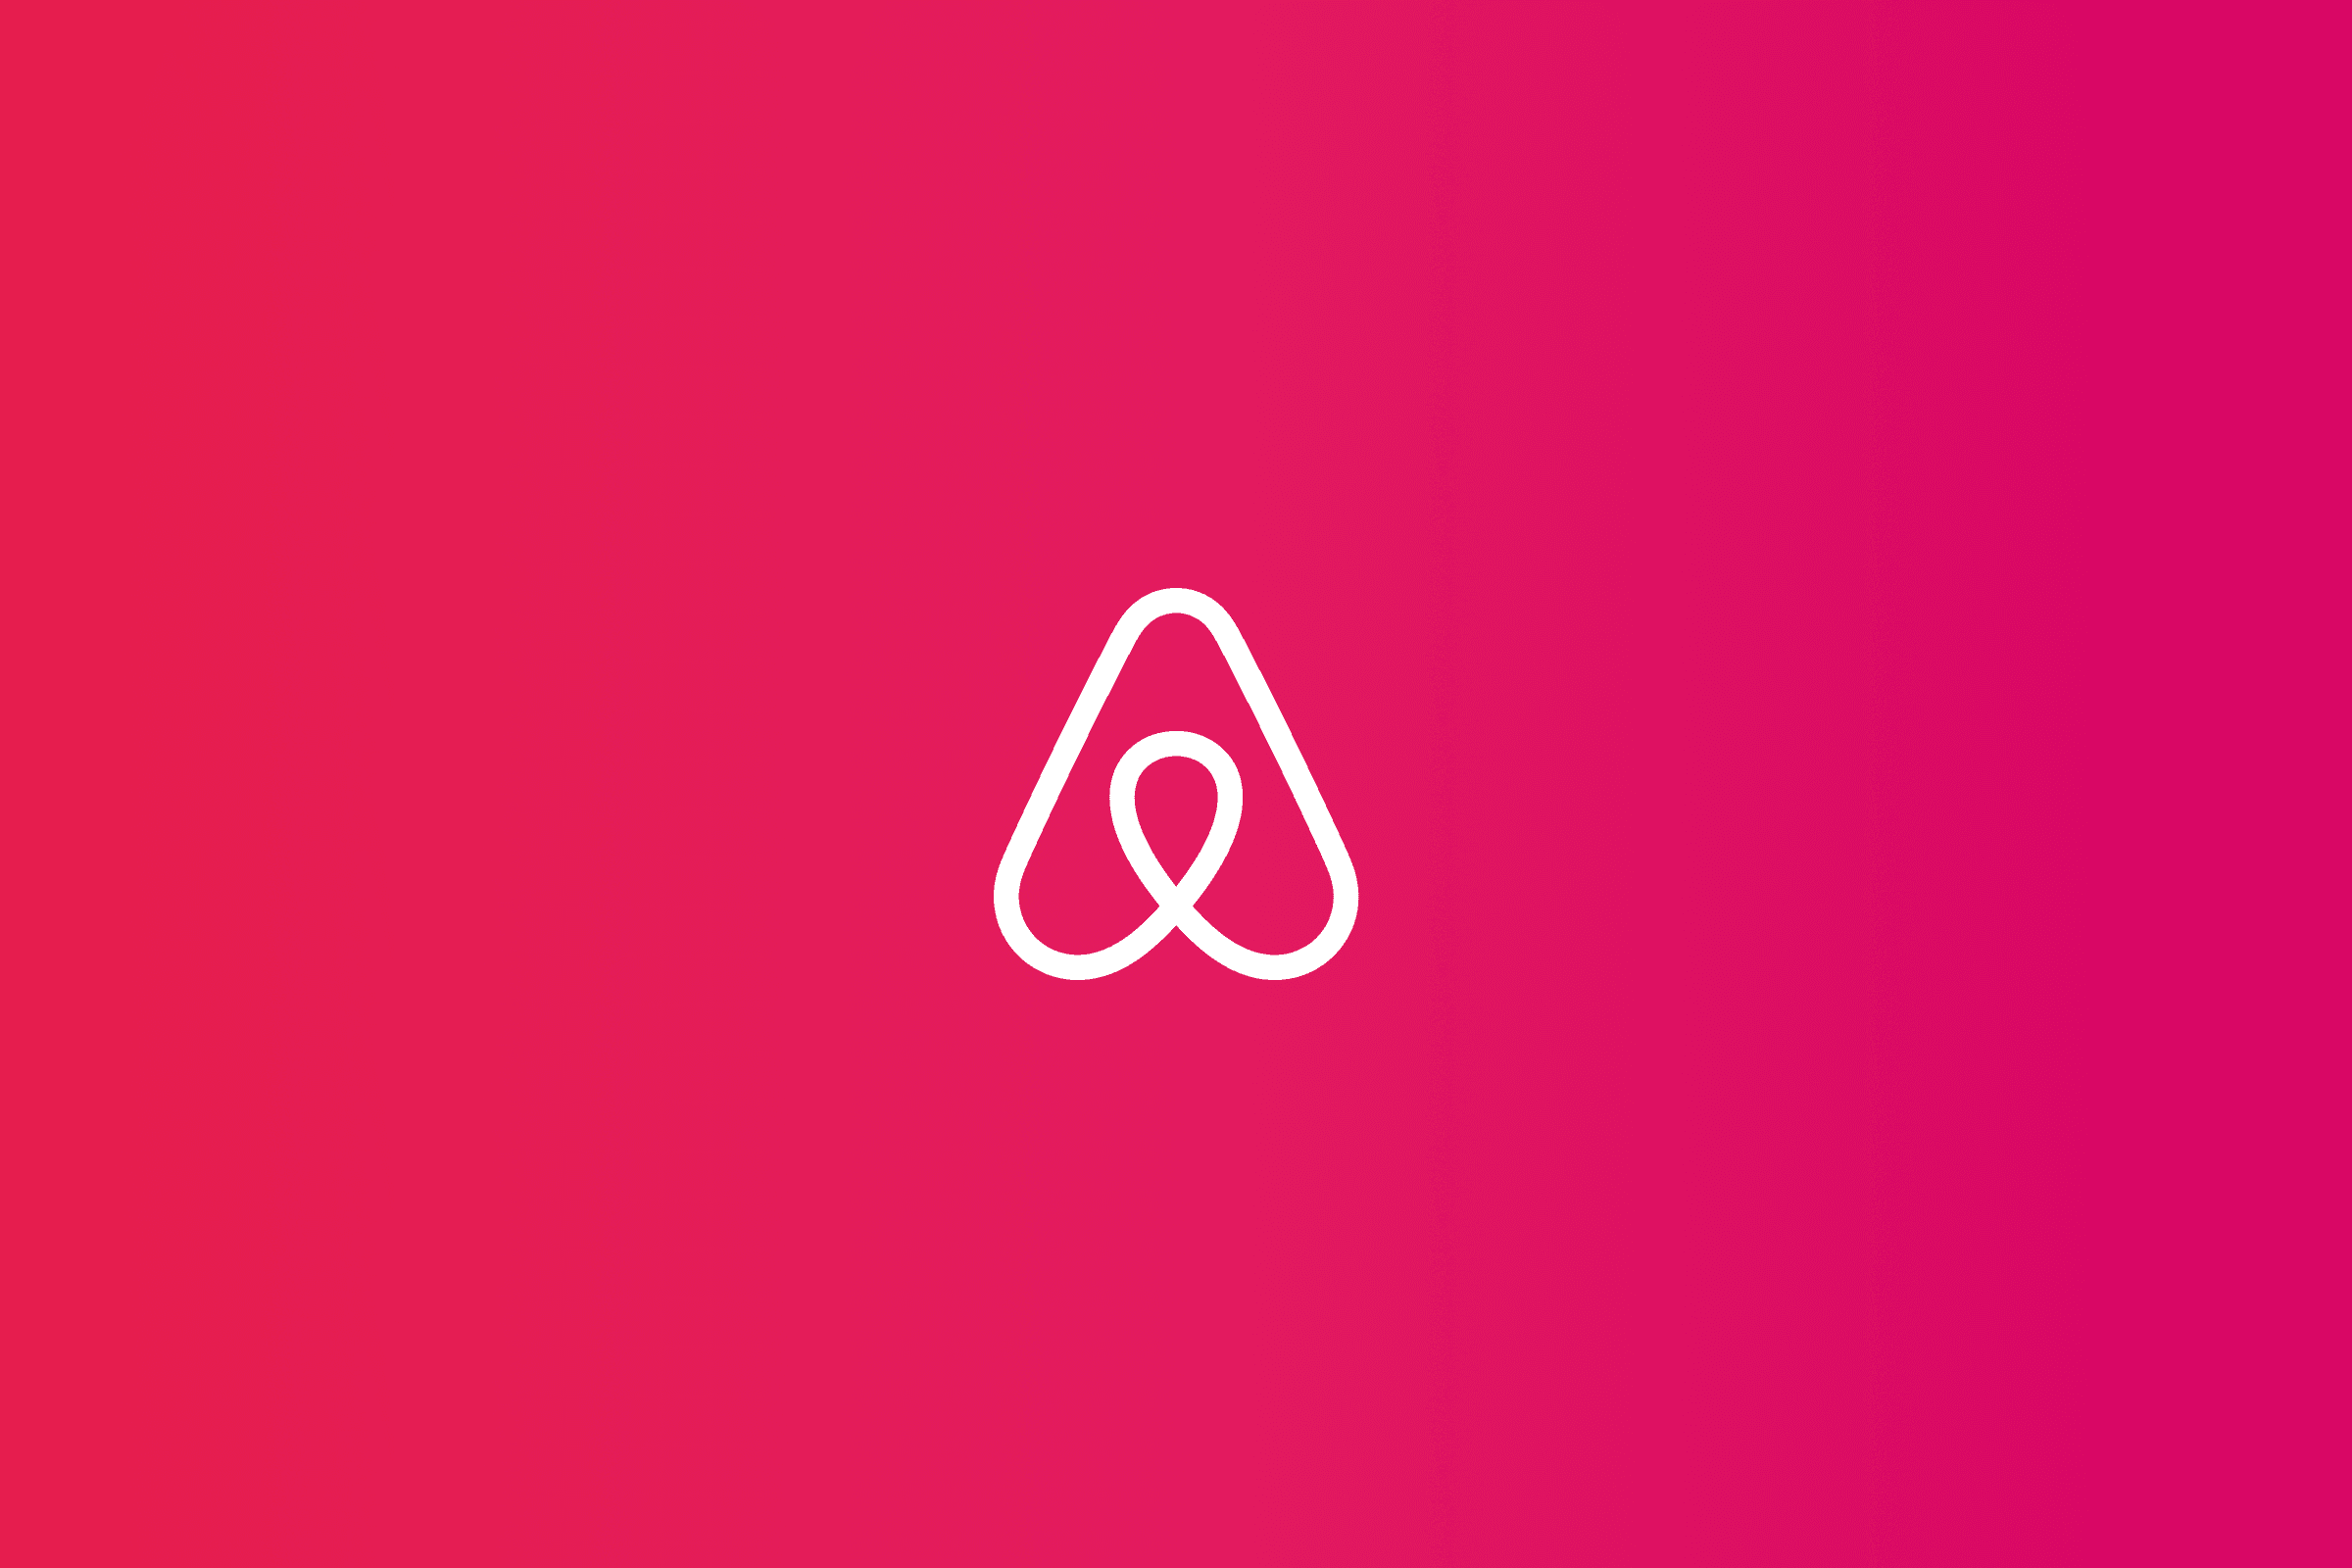 Airbnb_Logo_Over_Gradient_58fc1982a7.png?